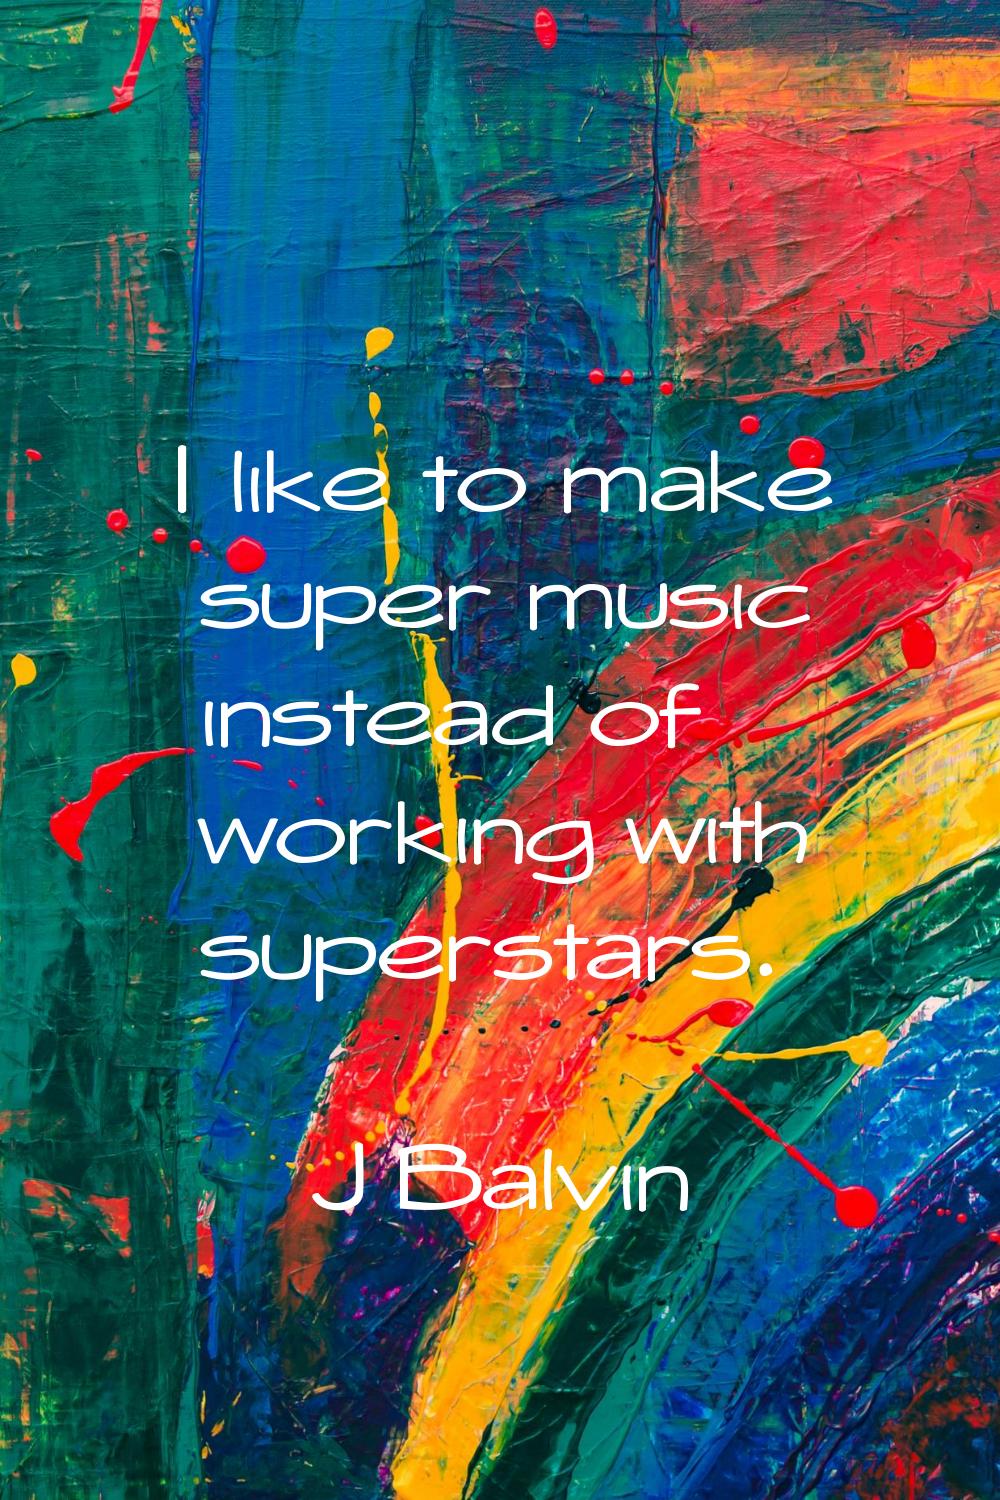 I like to make super music instead of working with superstars.